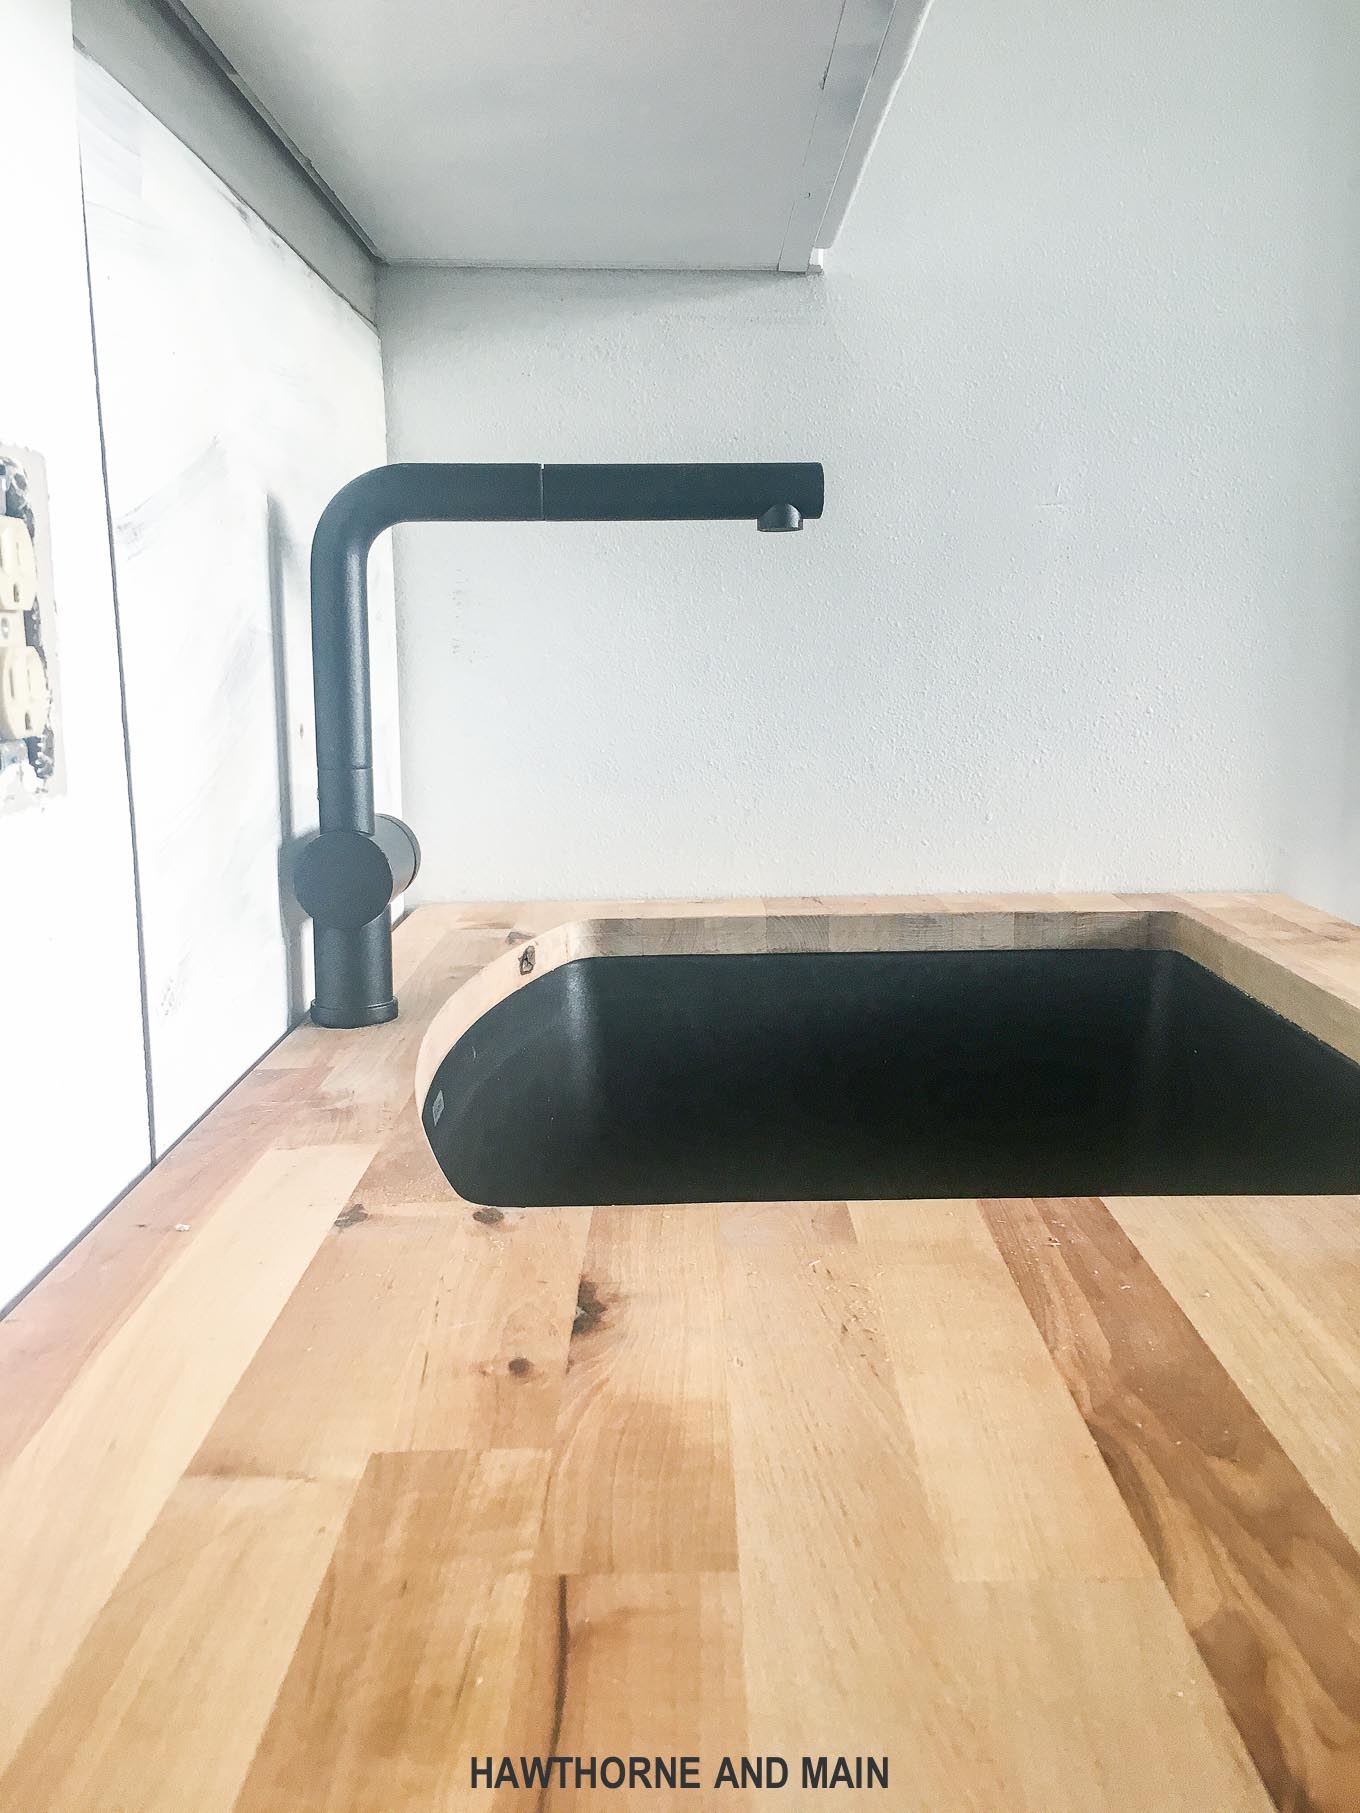 How to install an undermount sink...and learning when to DIY and when to get help. Part of DIY is learning when to get help on projects. DIY undermount sink